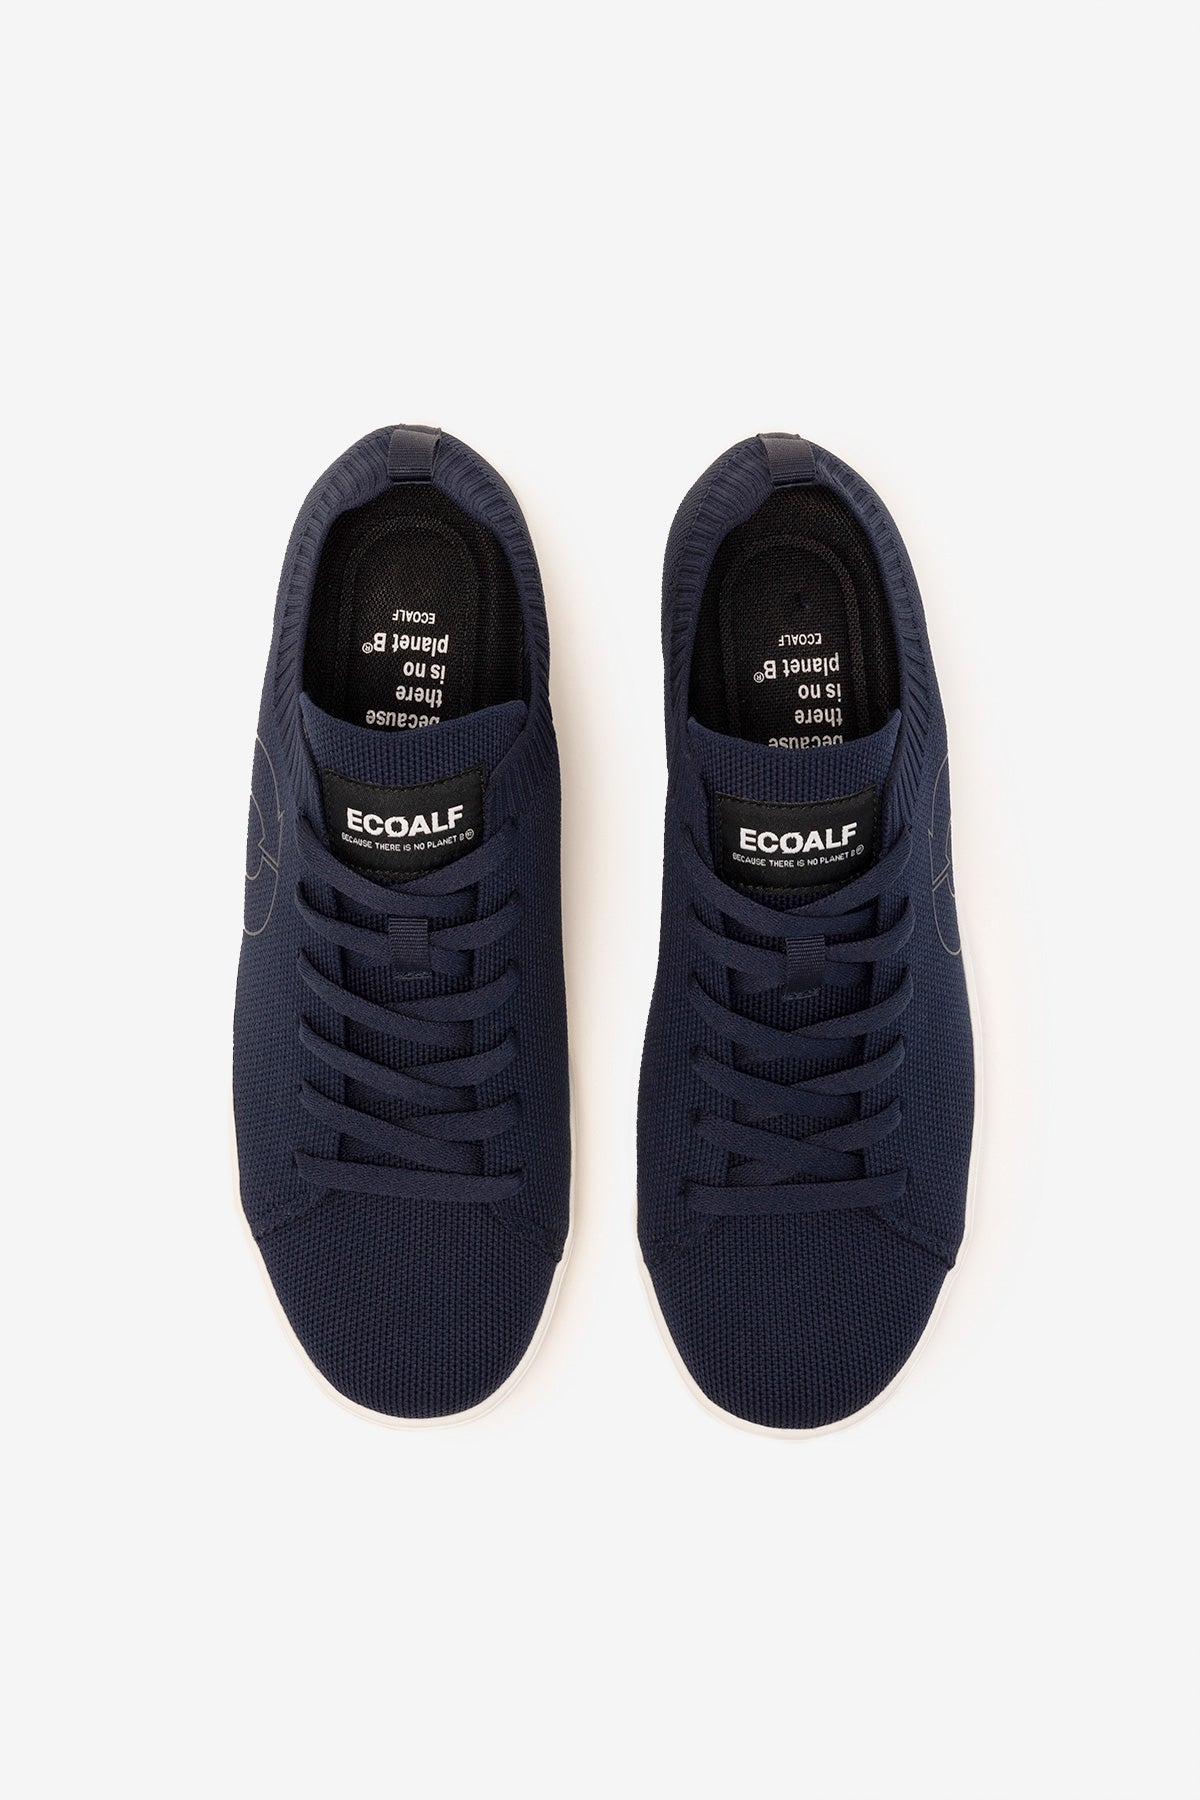 NAVY BLUE JERSEY TRAINERS